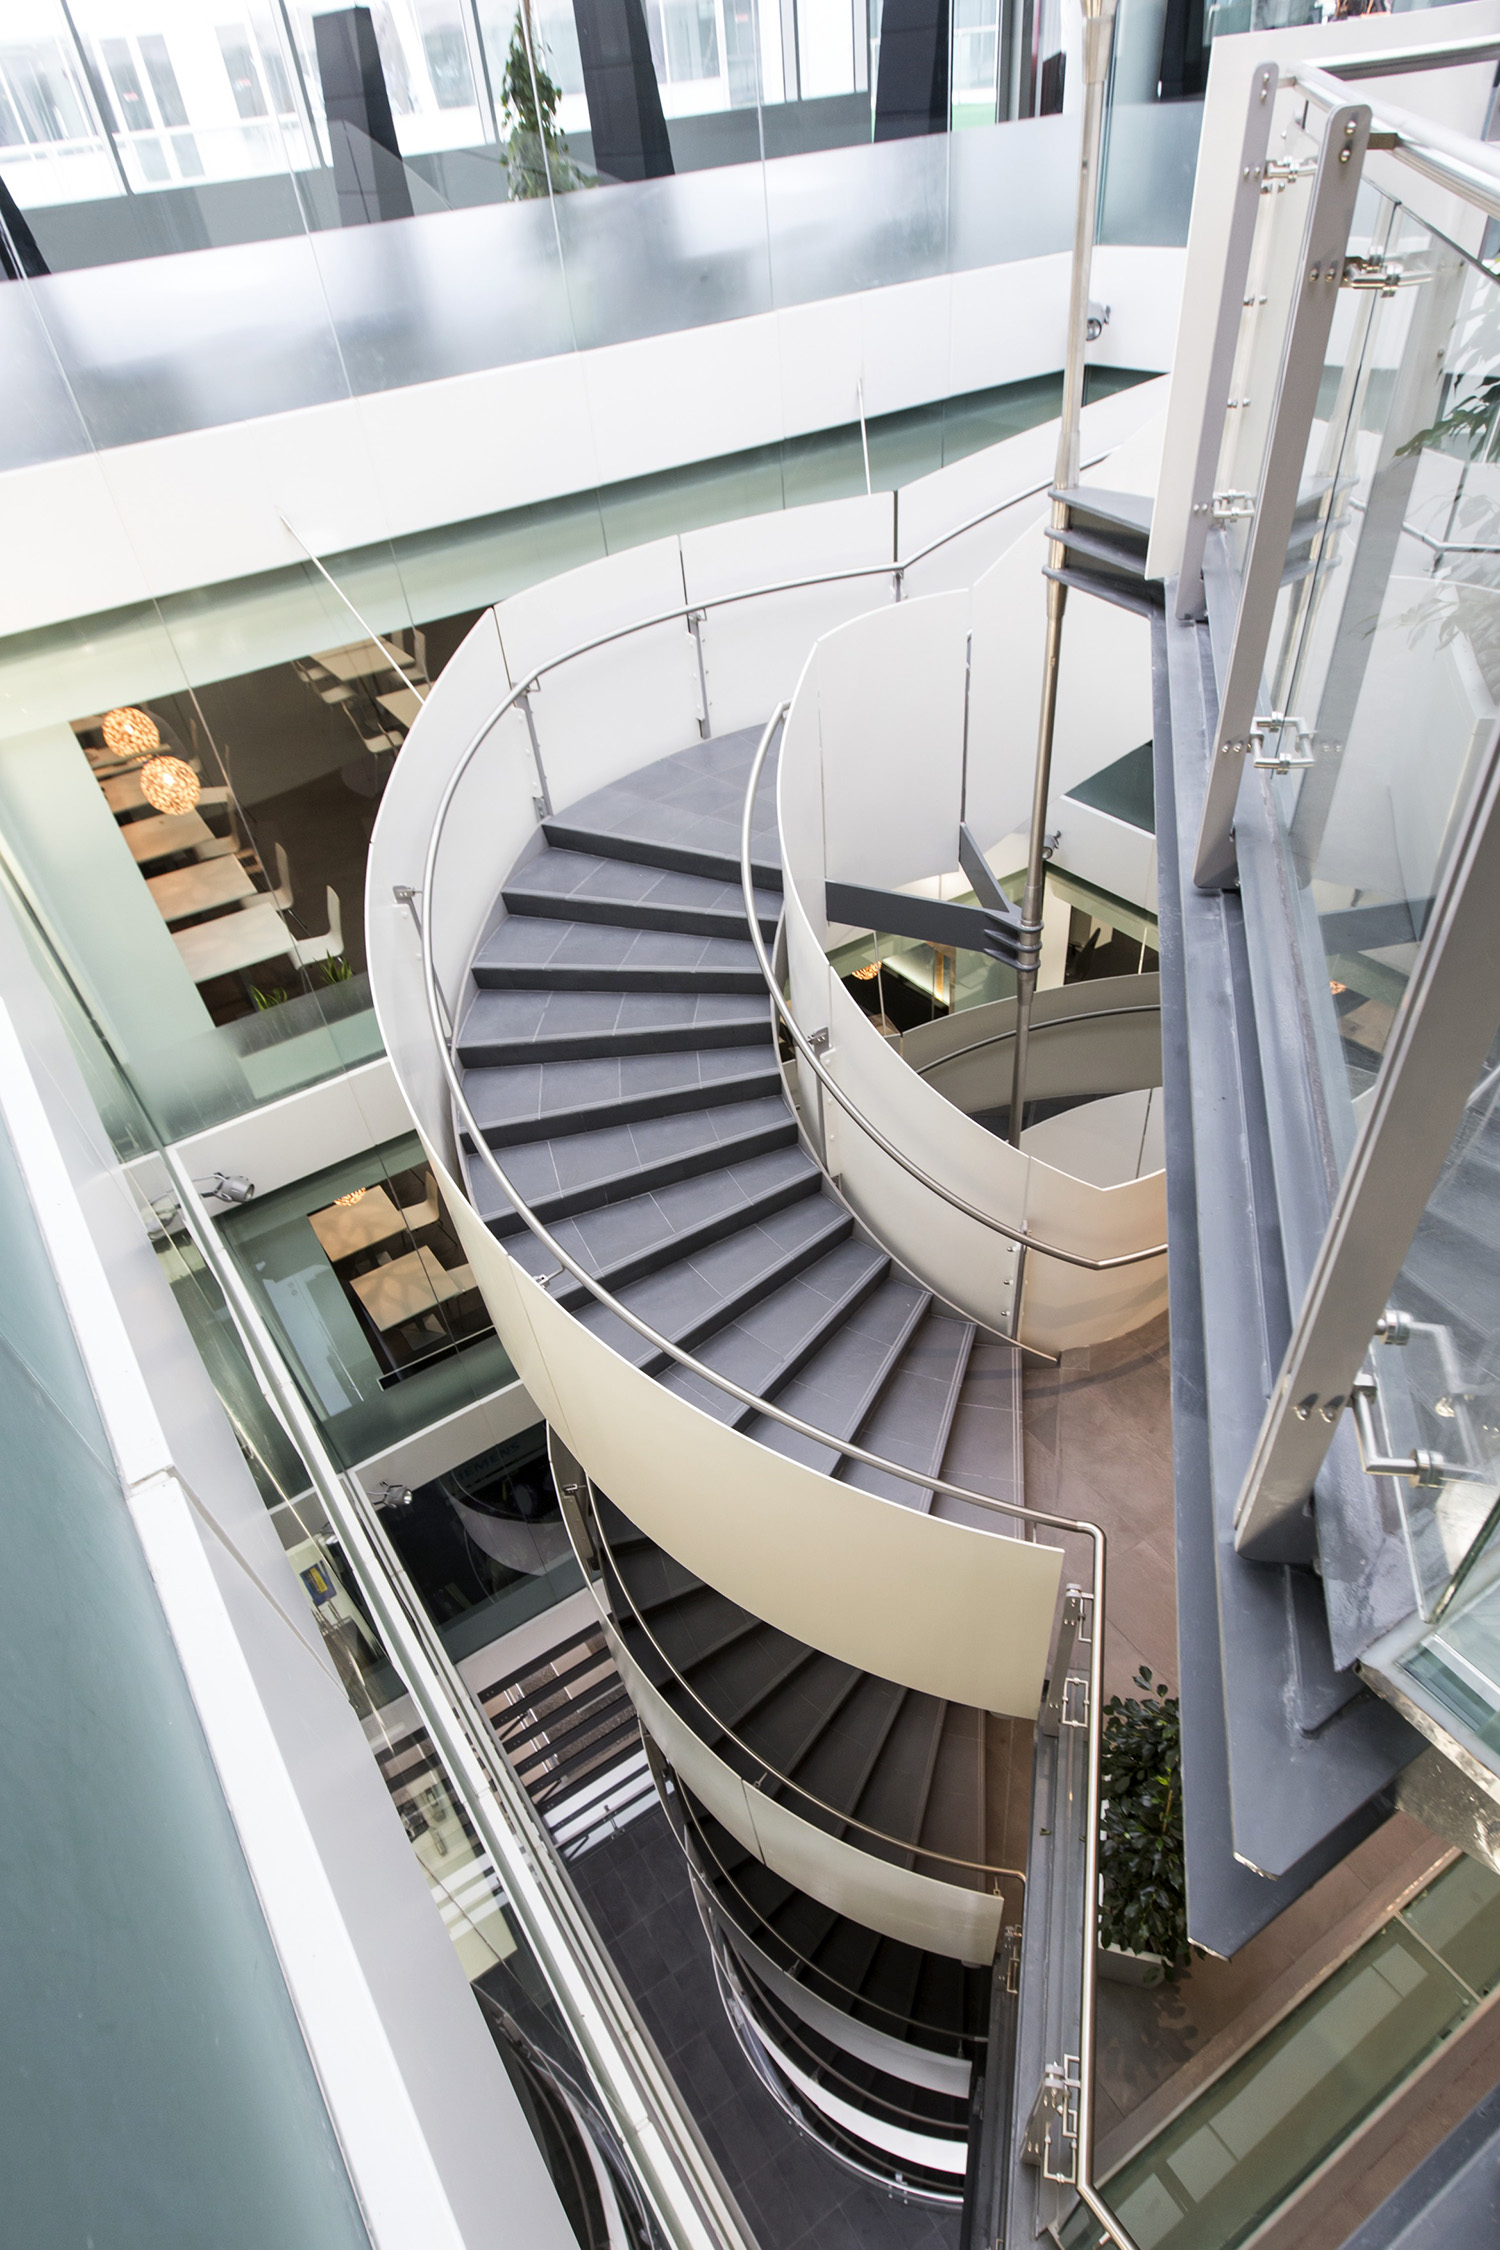 The central staircase at the heart of the project  